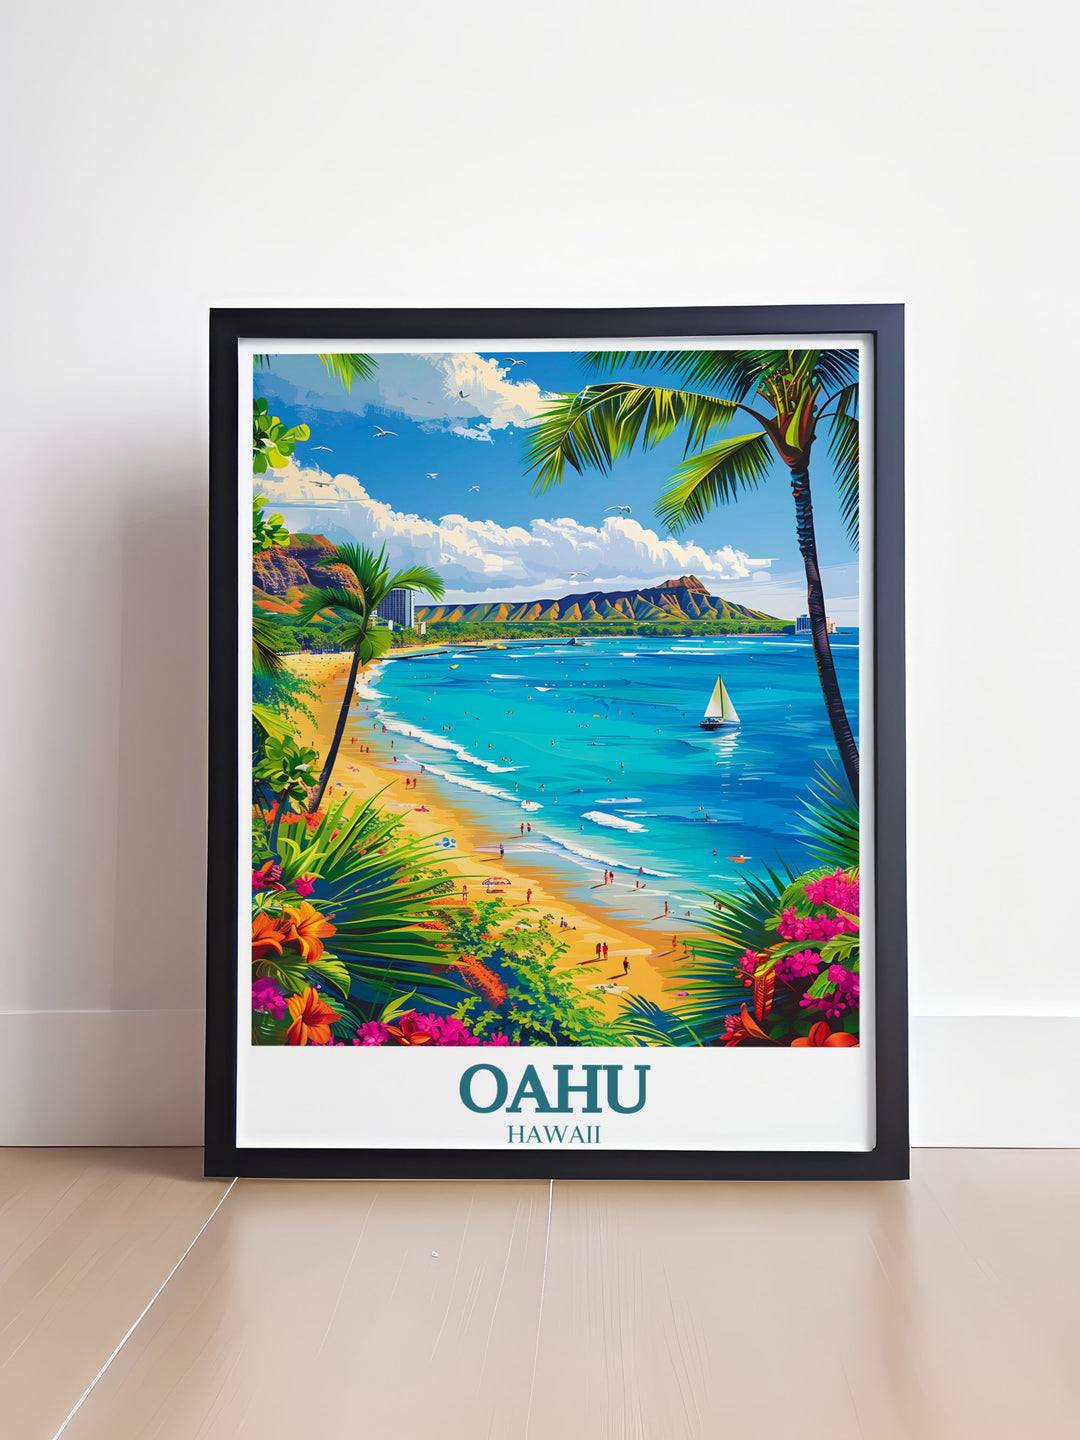 This captivating Oahu photo features Waikiki Beach and Diamond Head Crater offering a breathtaking glimpse into the natural beauty of Hawaii ideal for home decoration.